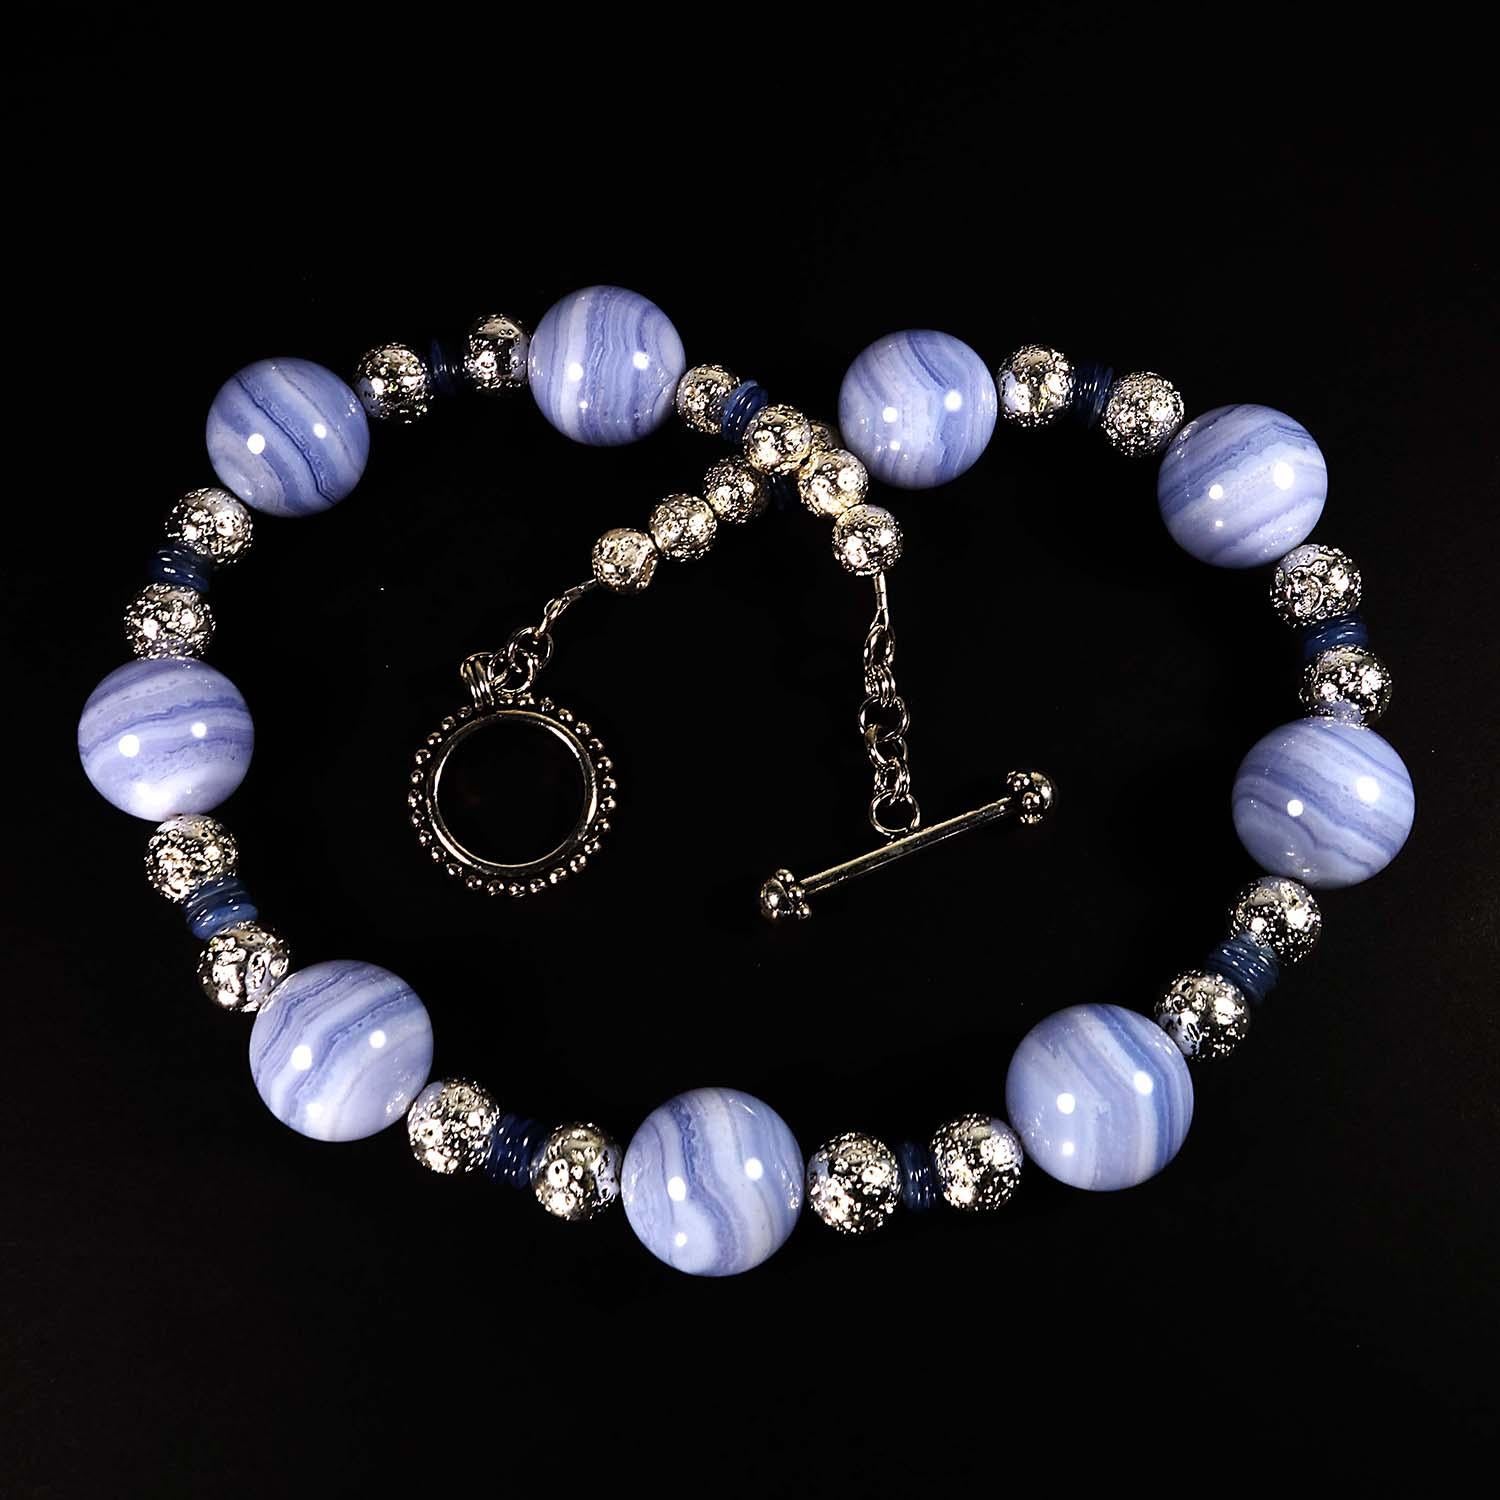 Stunning Blue Lace Agate Necklace 2